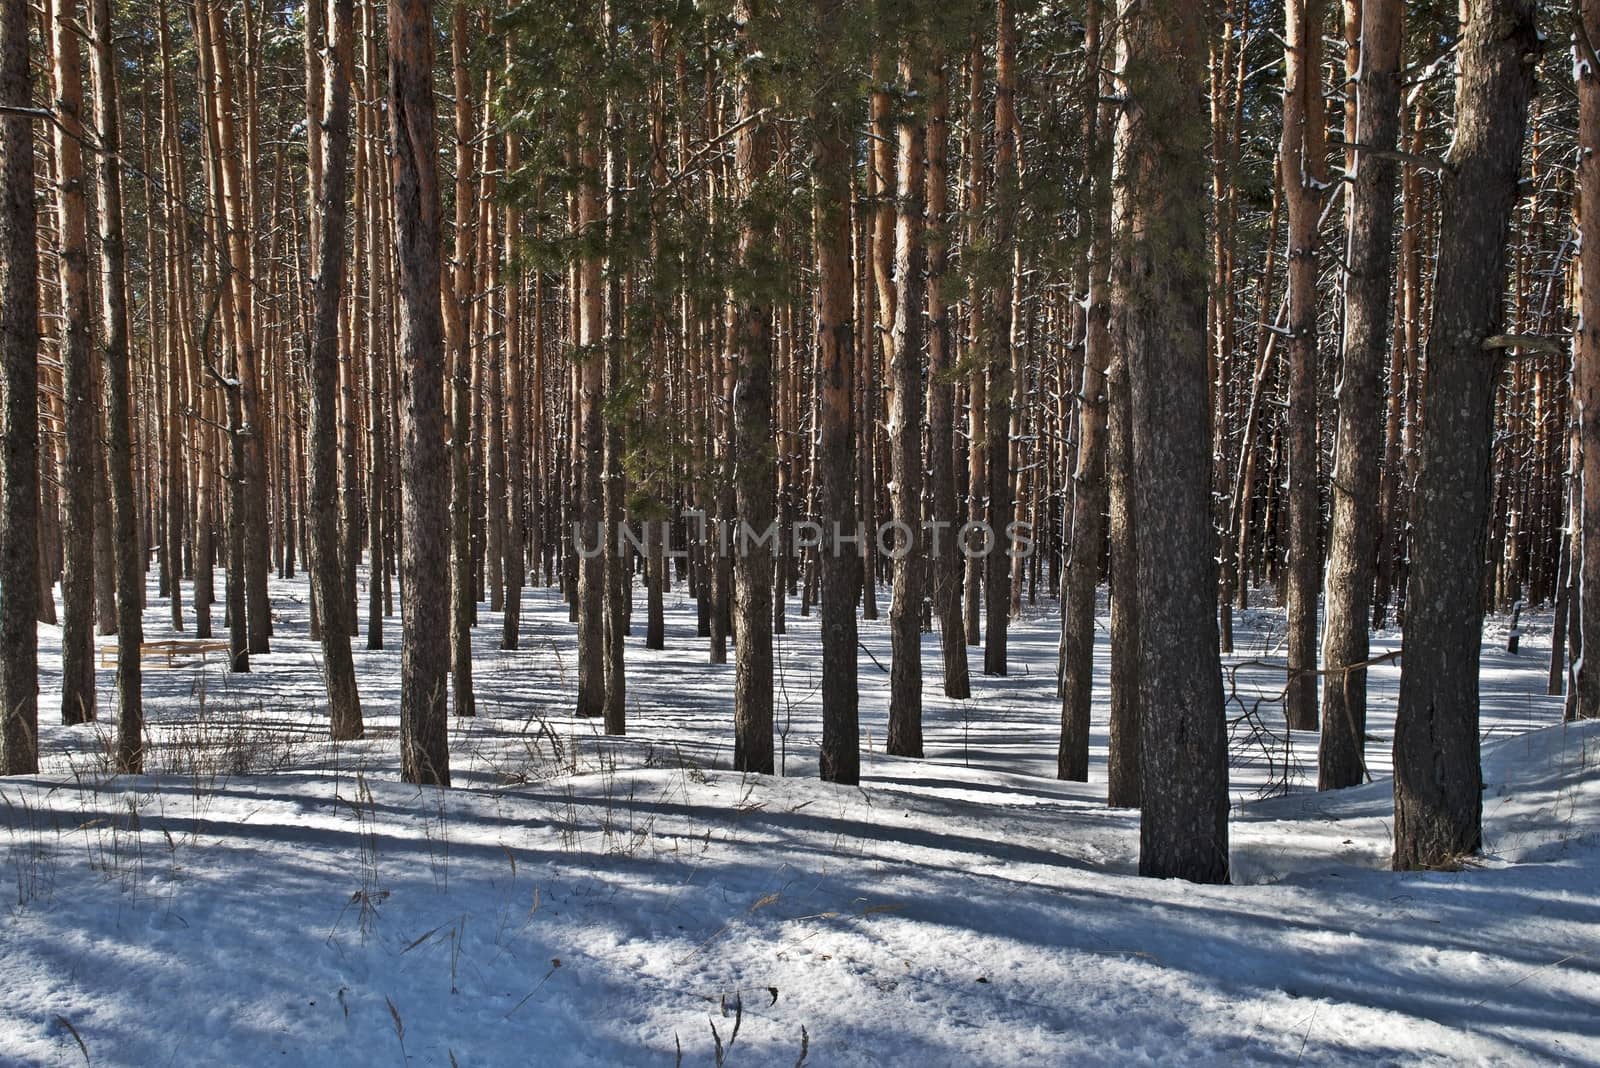 Pine trunks in winter forest by wander